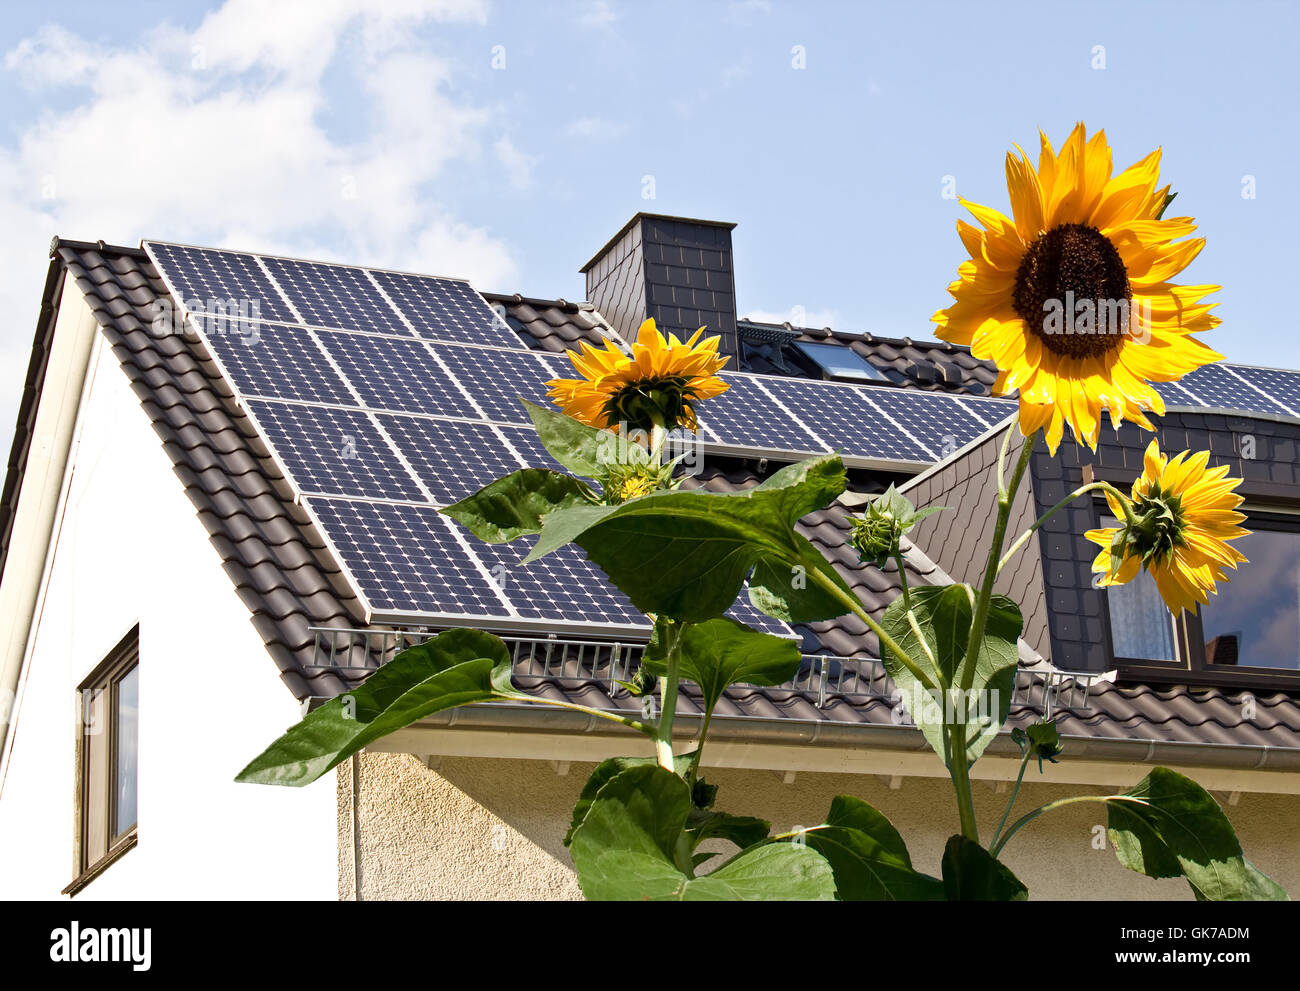 solar panels on house roof behind sunflower Stock Photo